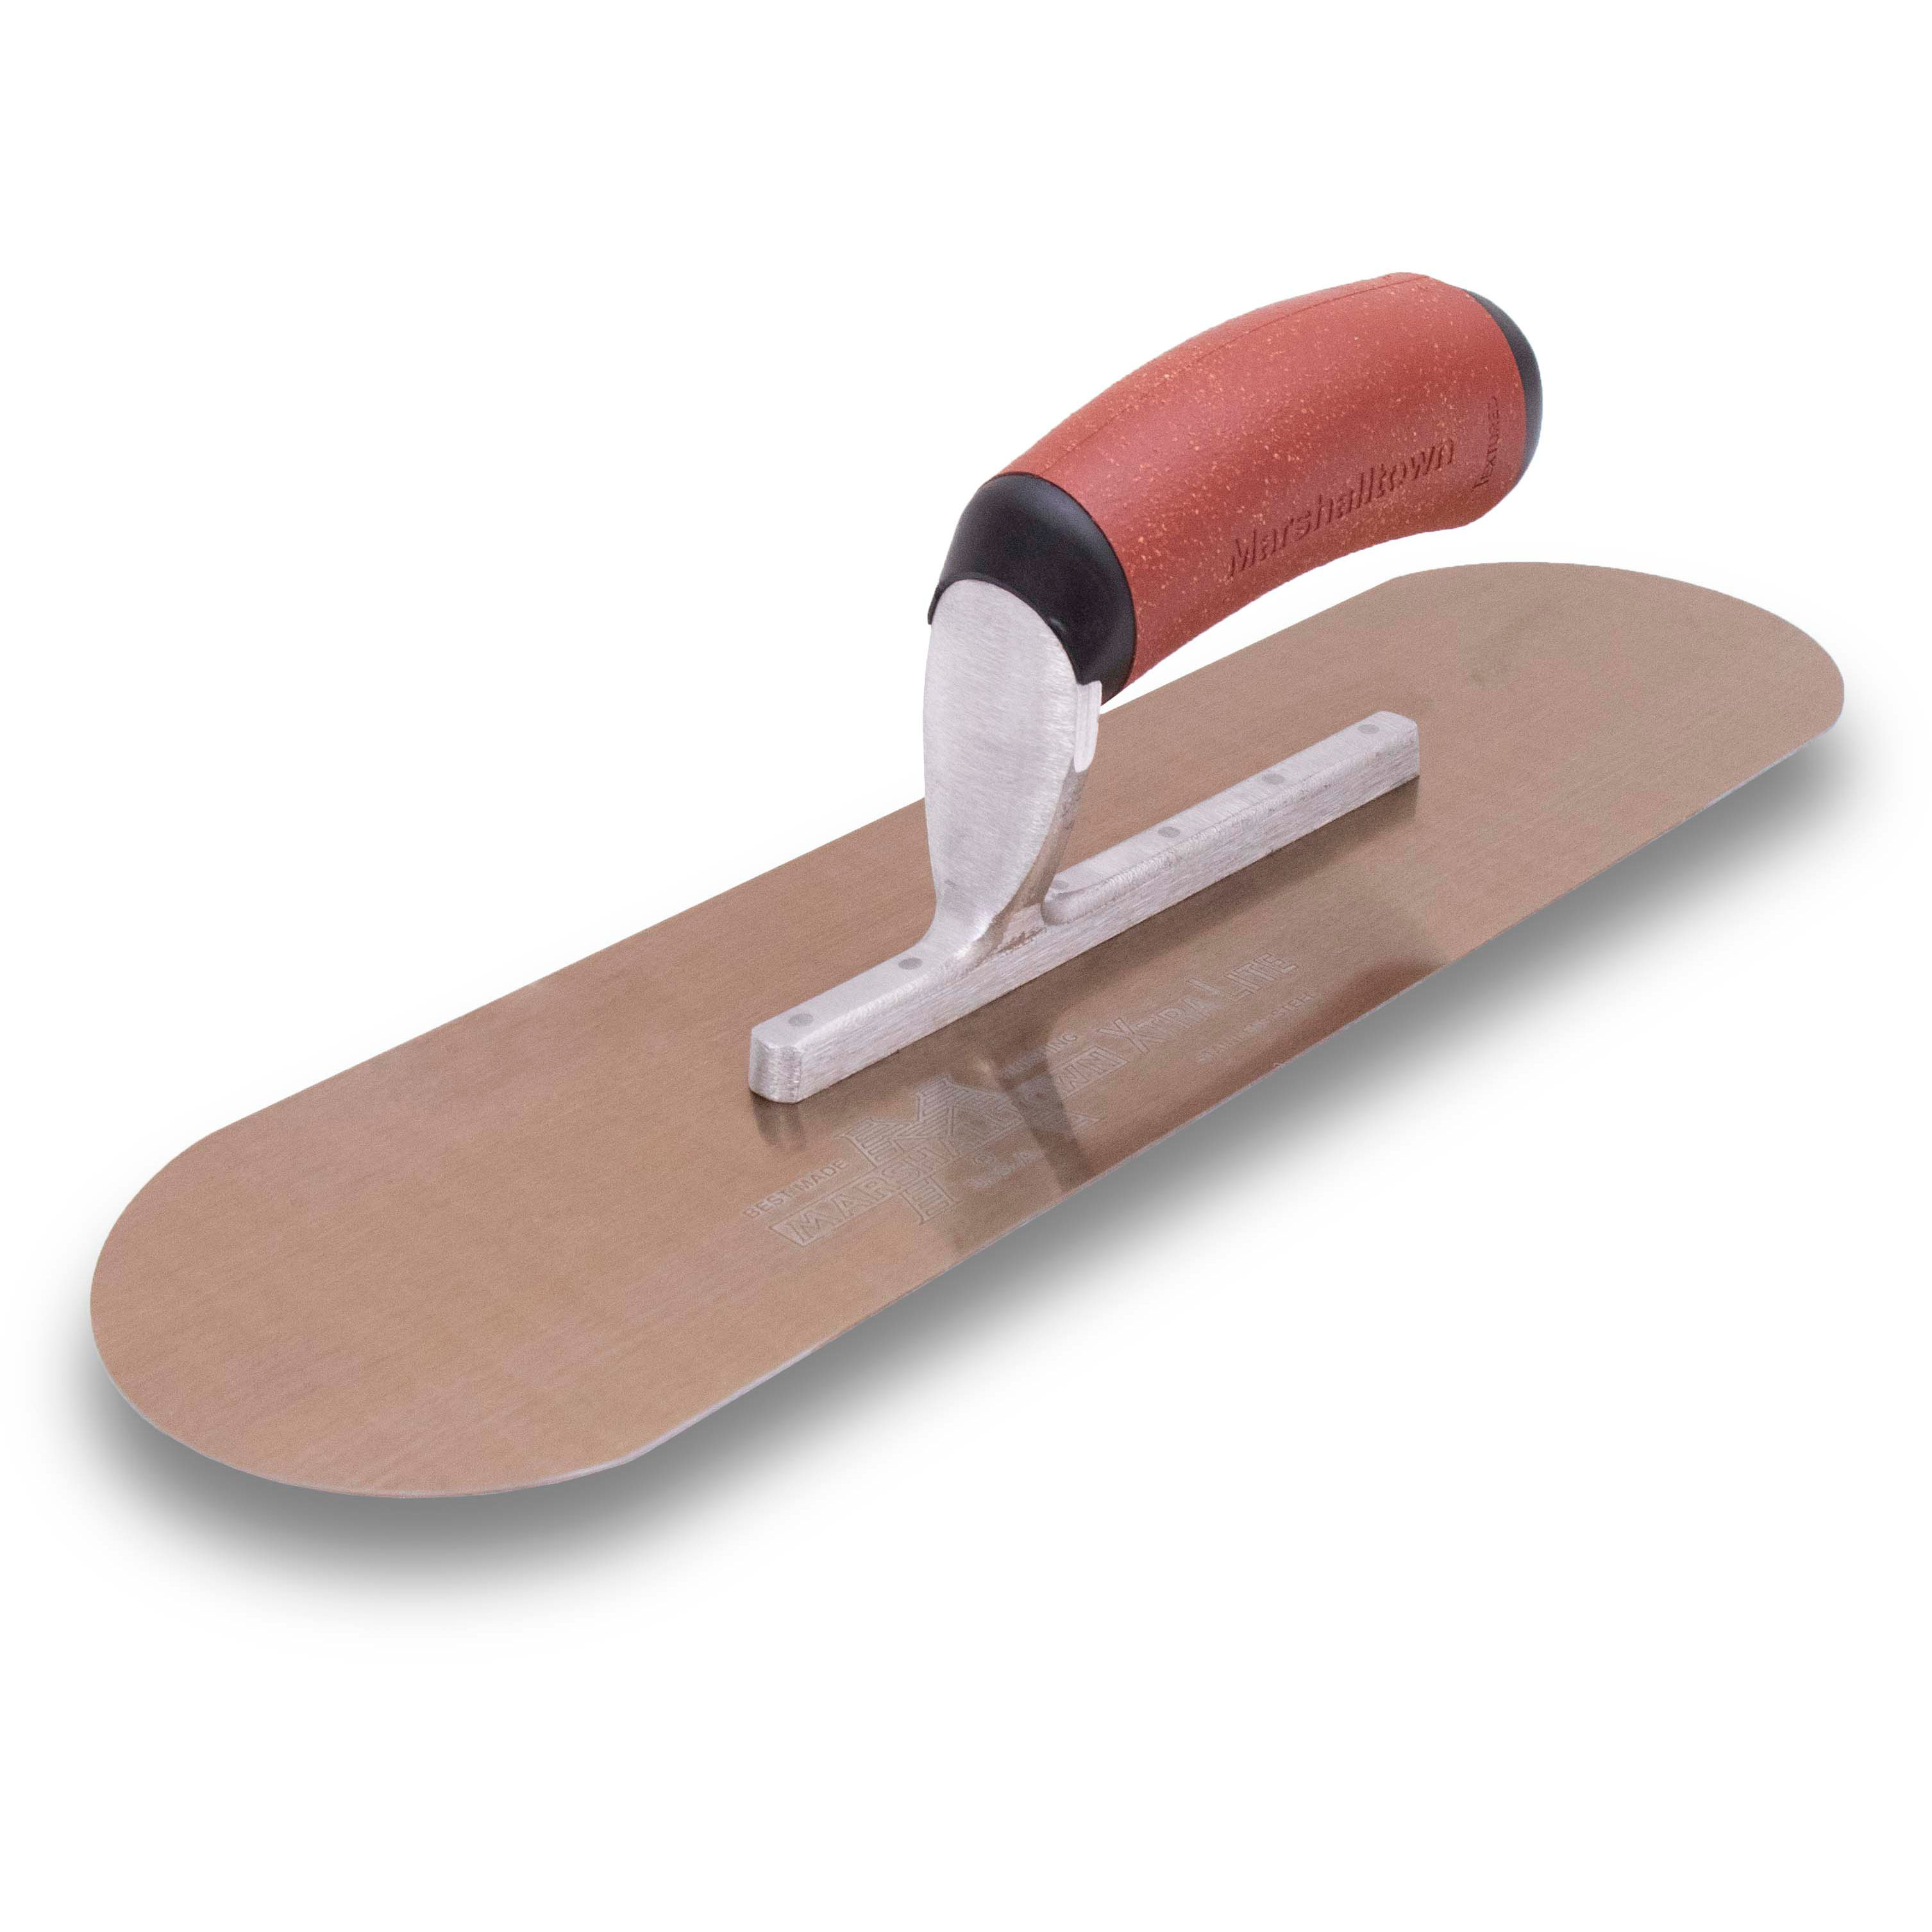 Marshalltown SP16GSDC 16in x 4-1/2in Golden Stainless Steel Pool Trowel with DuraCork Handle SP16GSDC